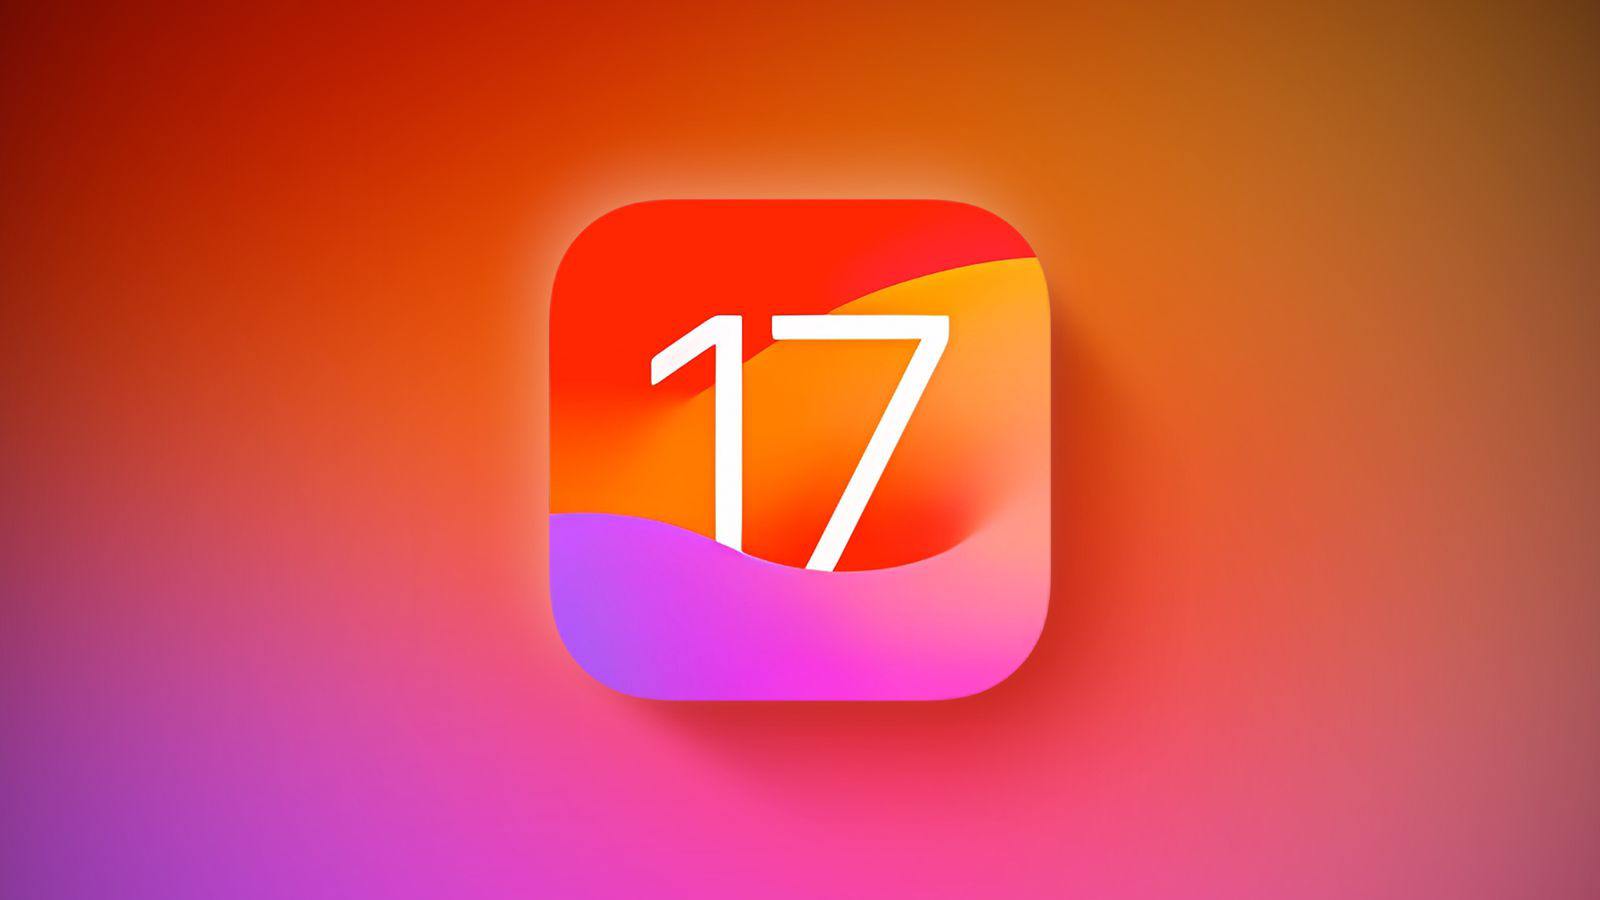 What Might Arrive On Your IPhone Soon In IOS 17.1 Beta 1